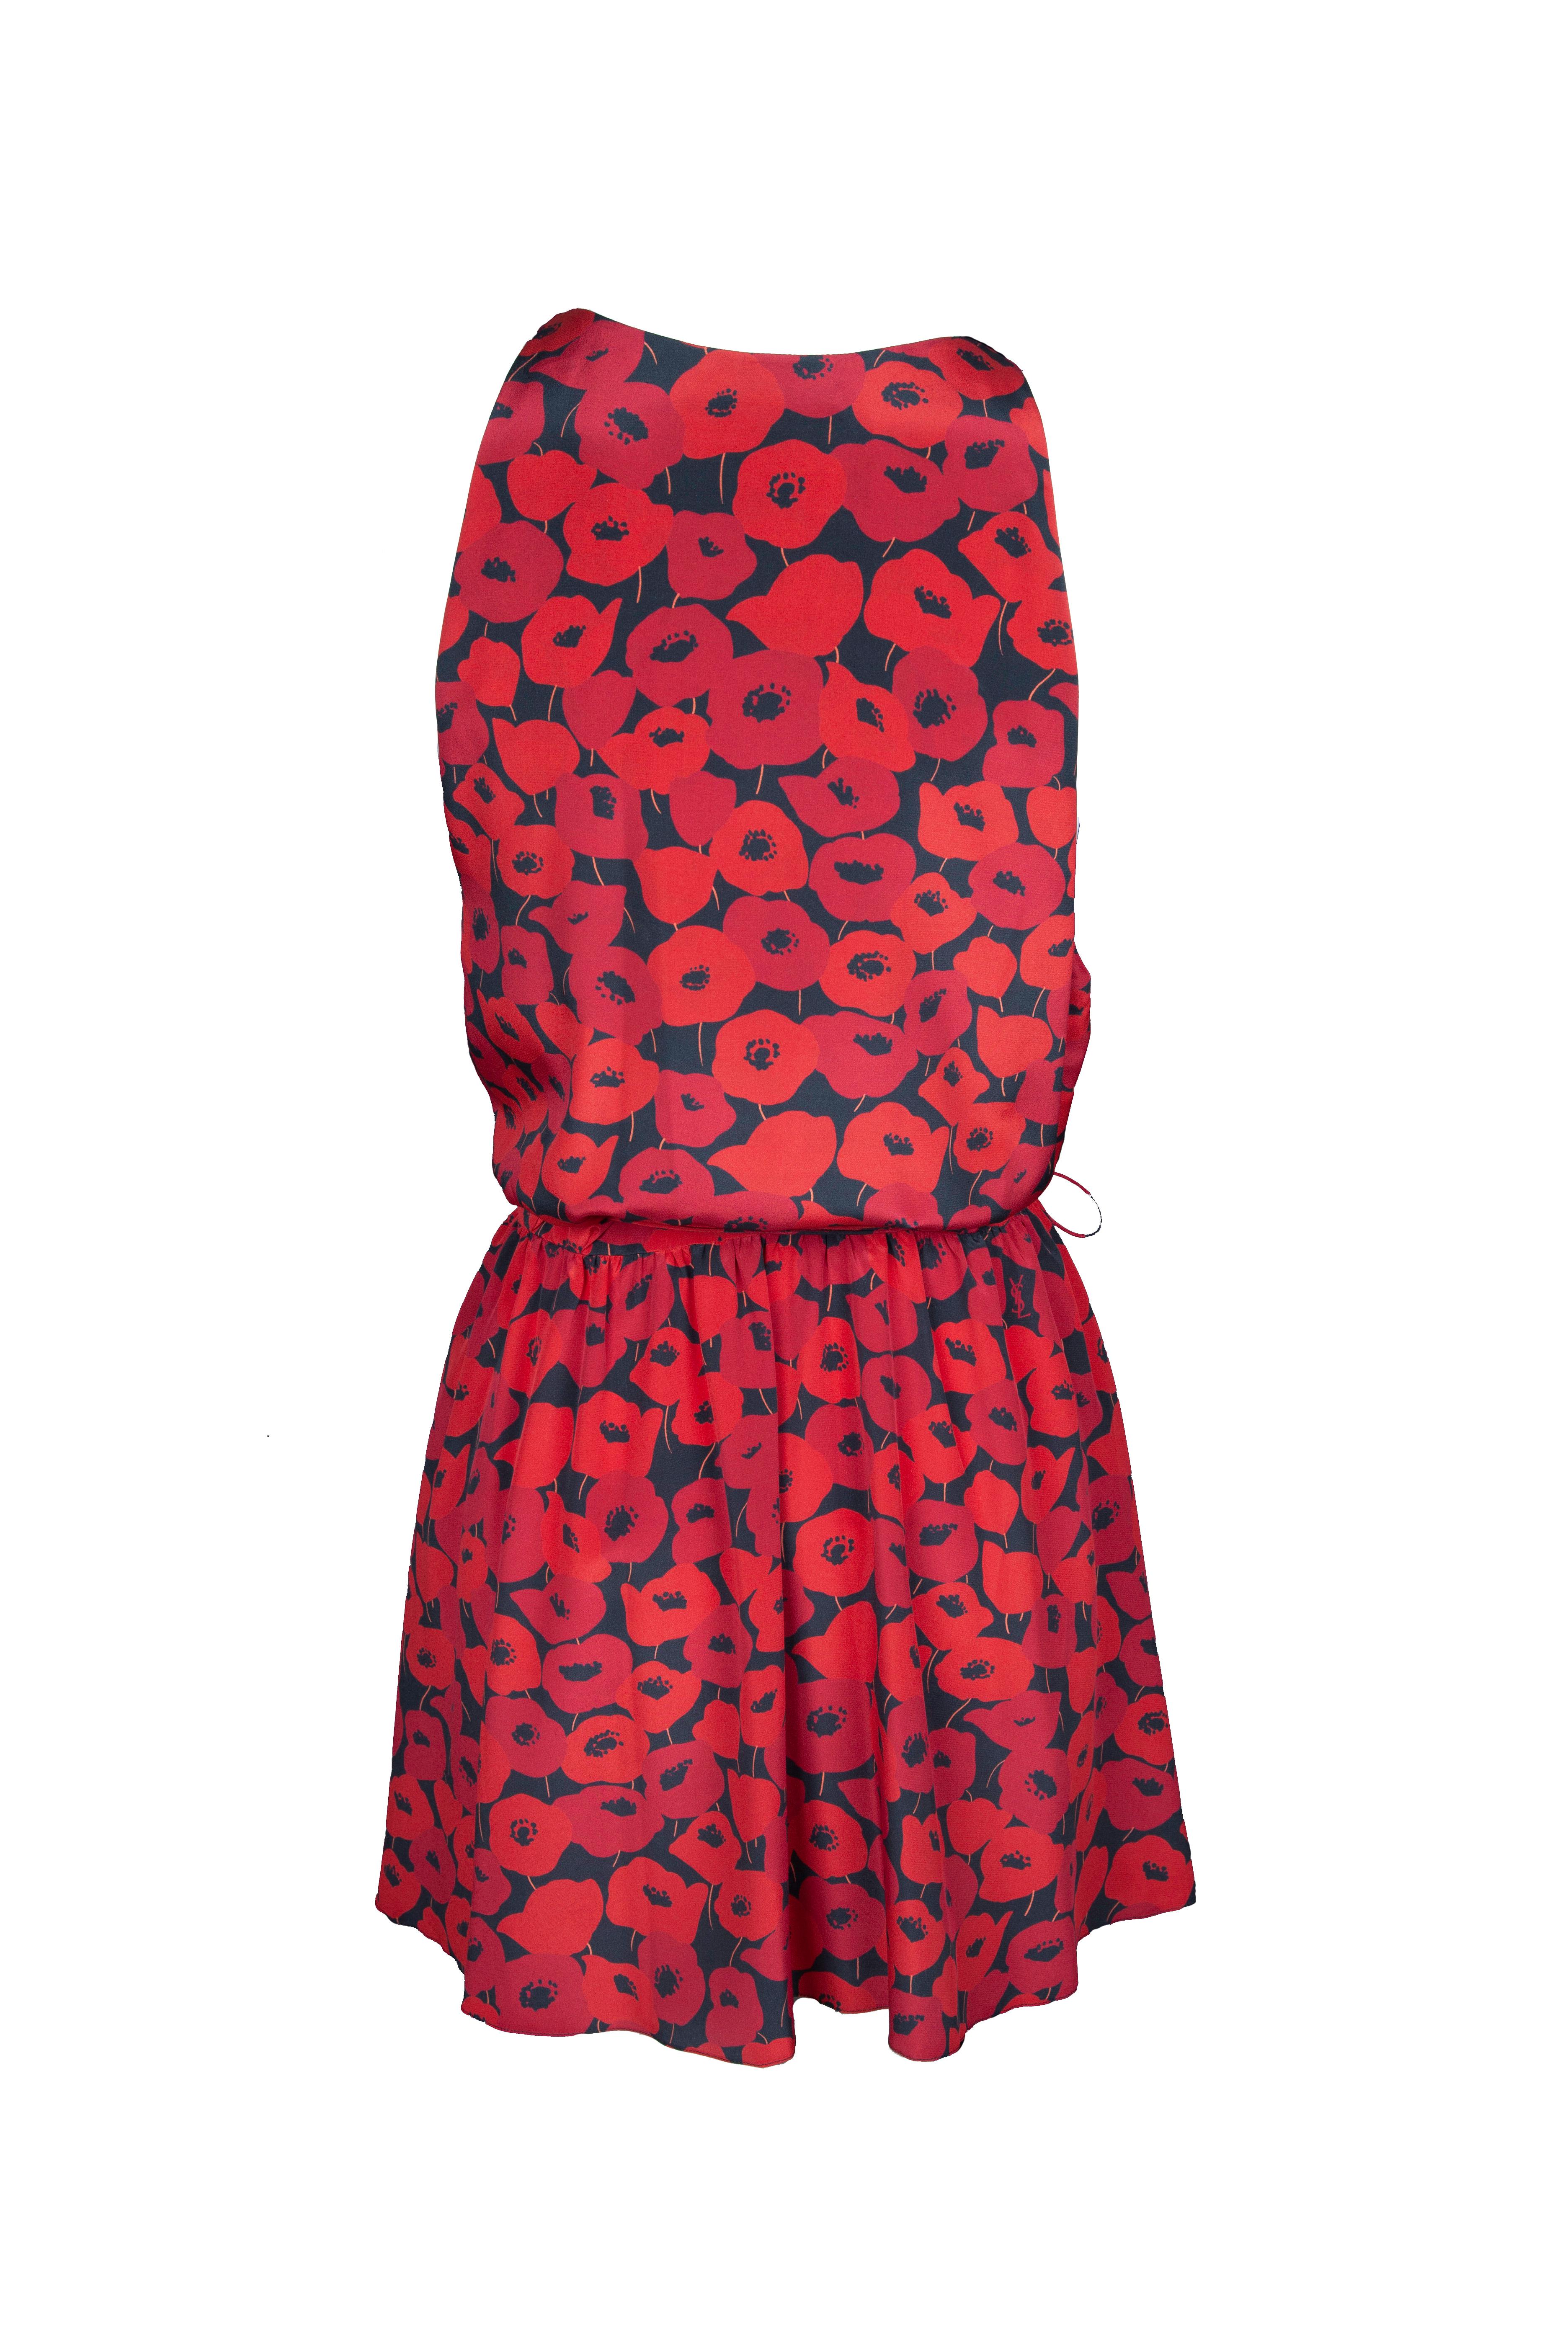 This Saint Laurent Resort 2018 red floral print mini dress features a flattering wrap silhouette and adjustable skinny ties to customize the fit. The light weight, non stretchy fabric is an ideal choice for a warm summer day, or choose to pair it